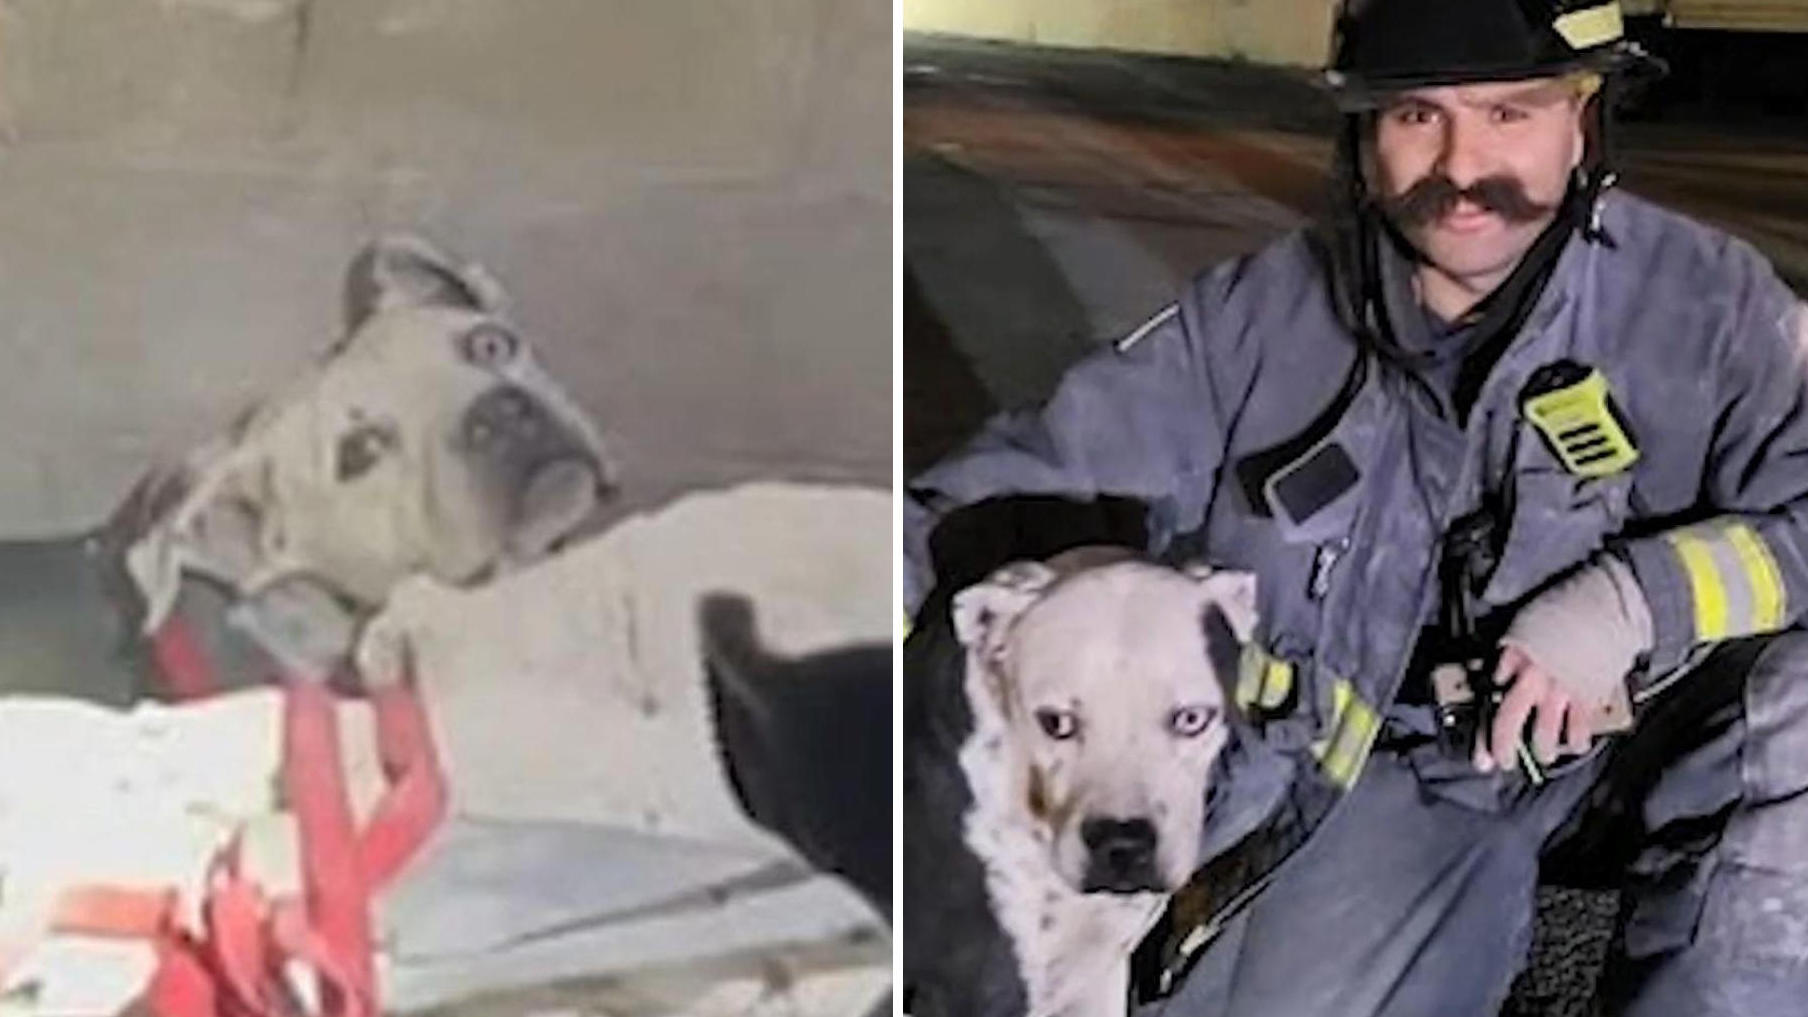 A firefighter rescues a dog trapped between walls, while his four-legged friend barks for help